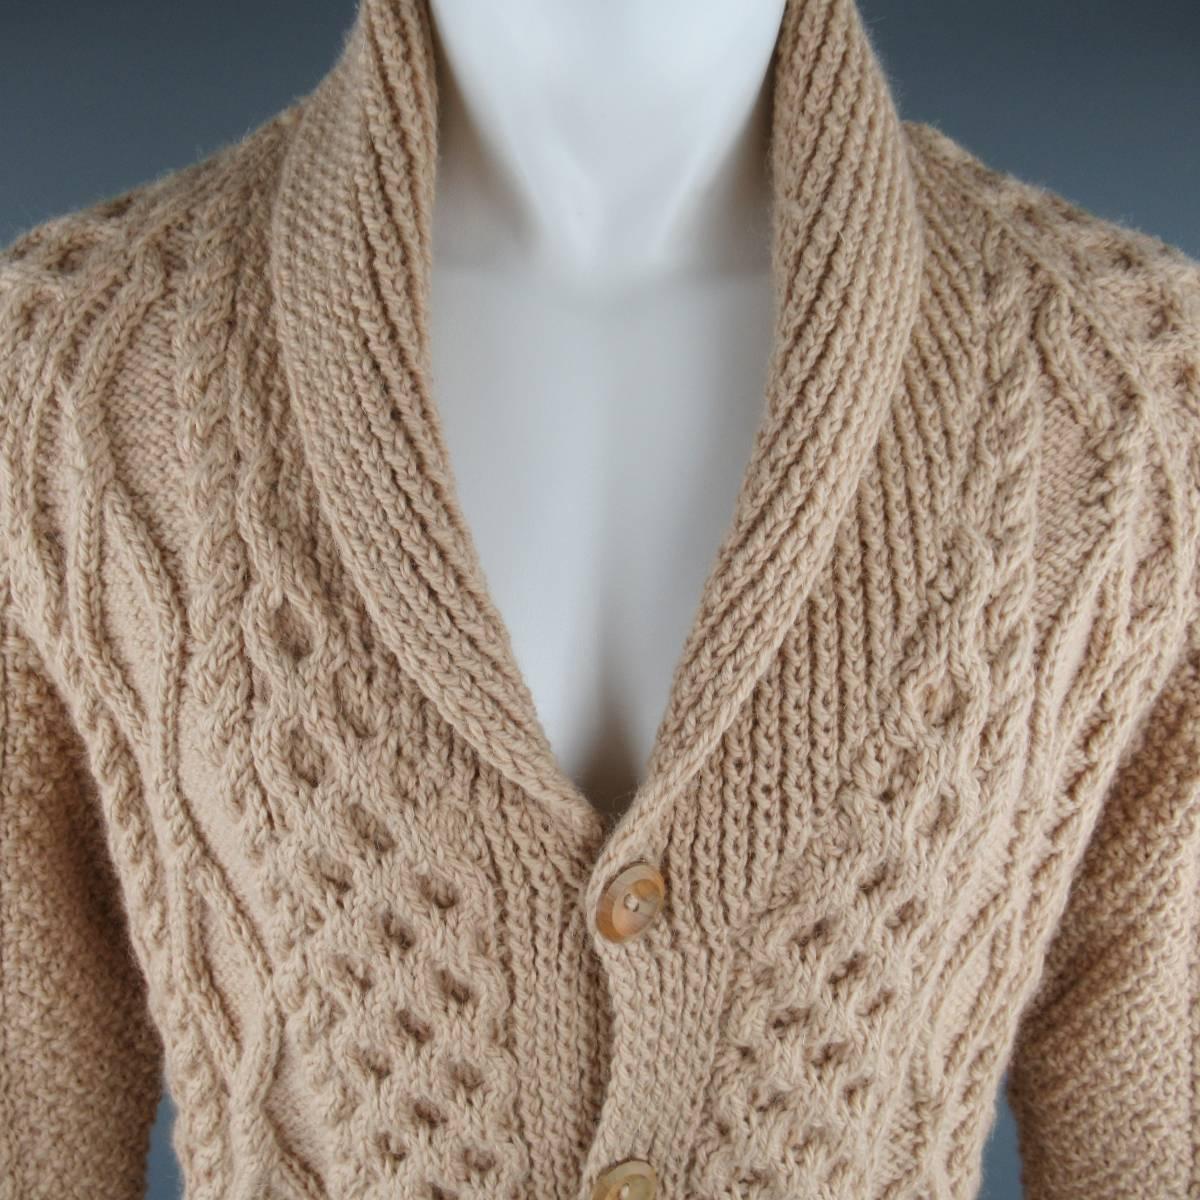 INVERALLAN Cardigan consists of wool material in a cream/khaki color tone. Designed in double/cable knit, shawl collar with a 5-button up front. Rib cuff and hem.
Patch pockets. Pure wool . Made in Scotland.
 
Good Pre-Owned Condition
